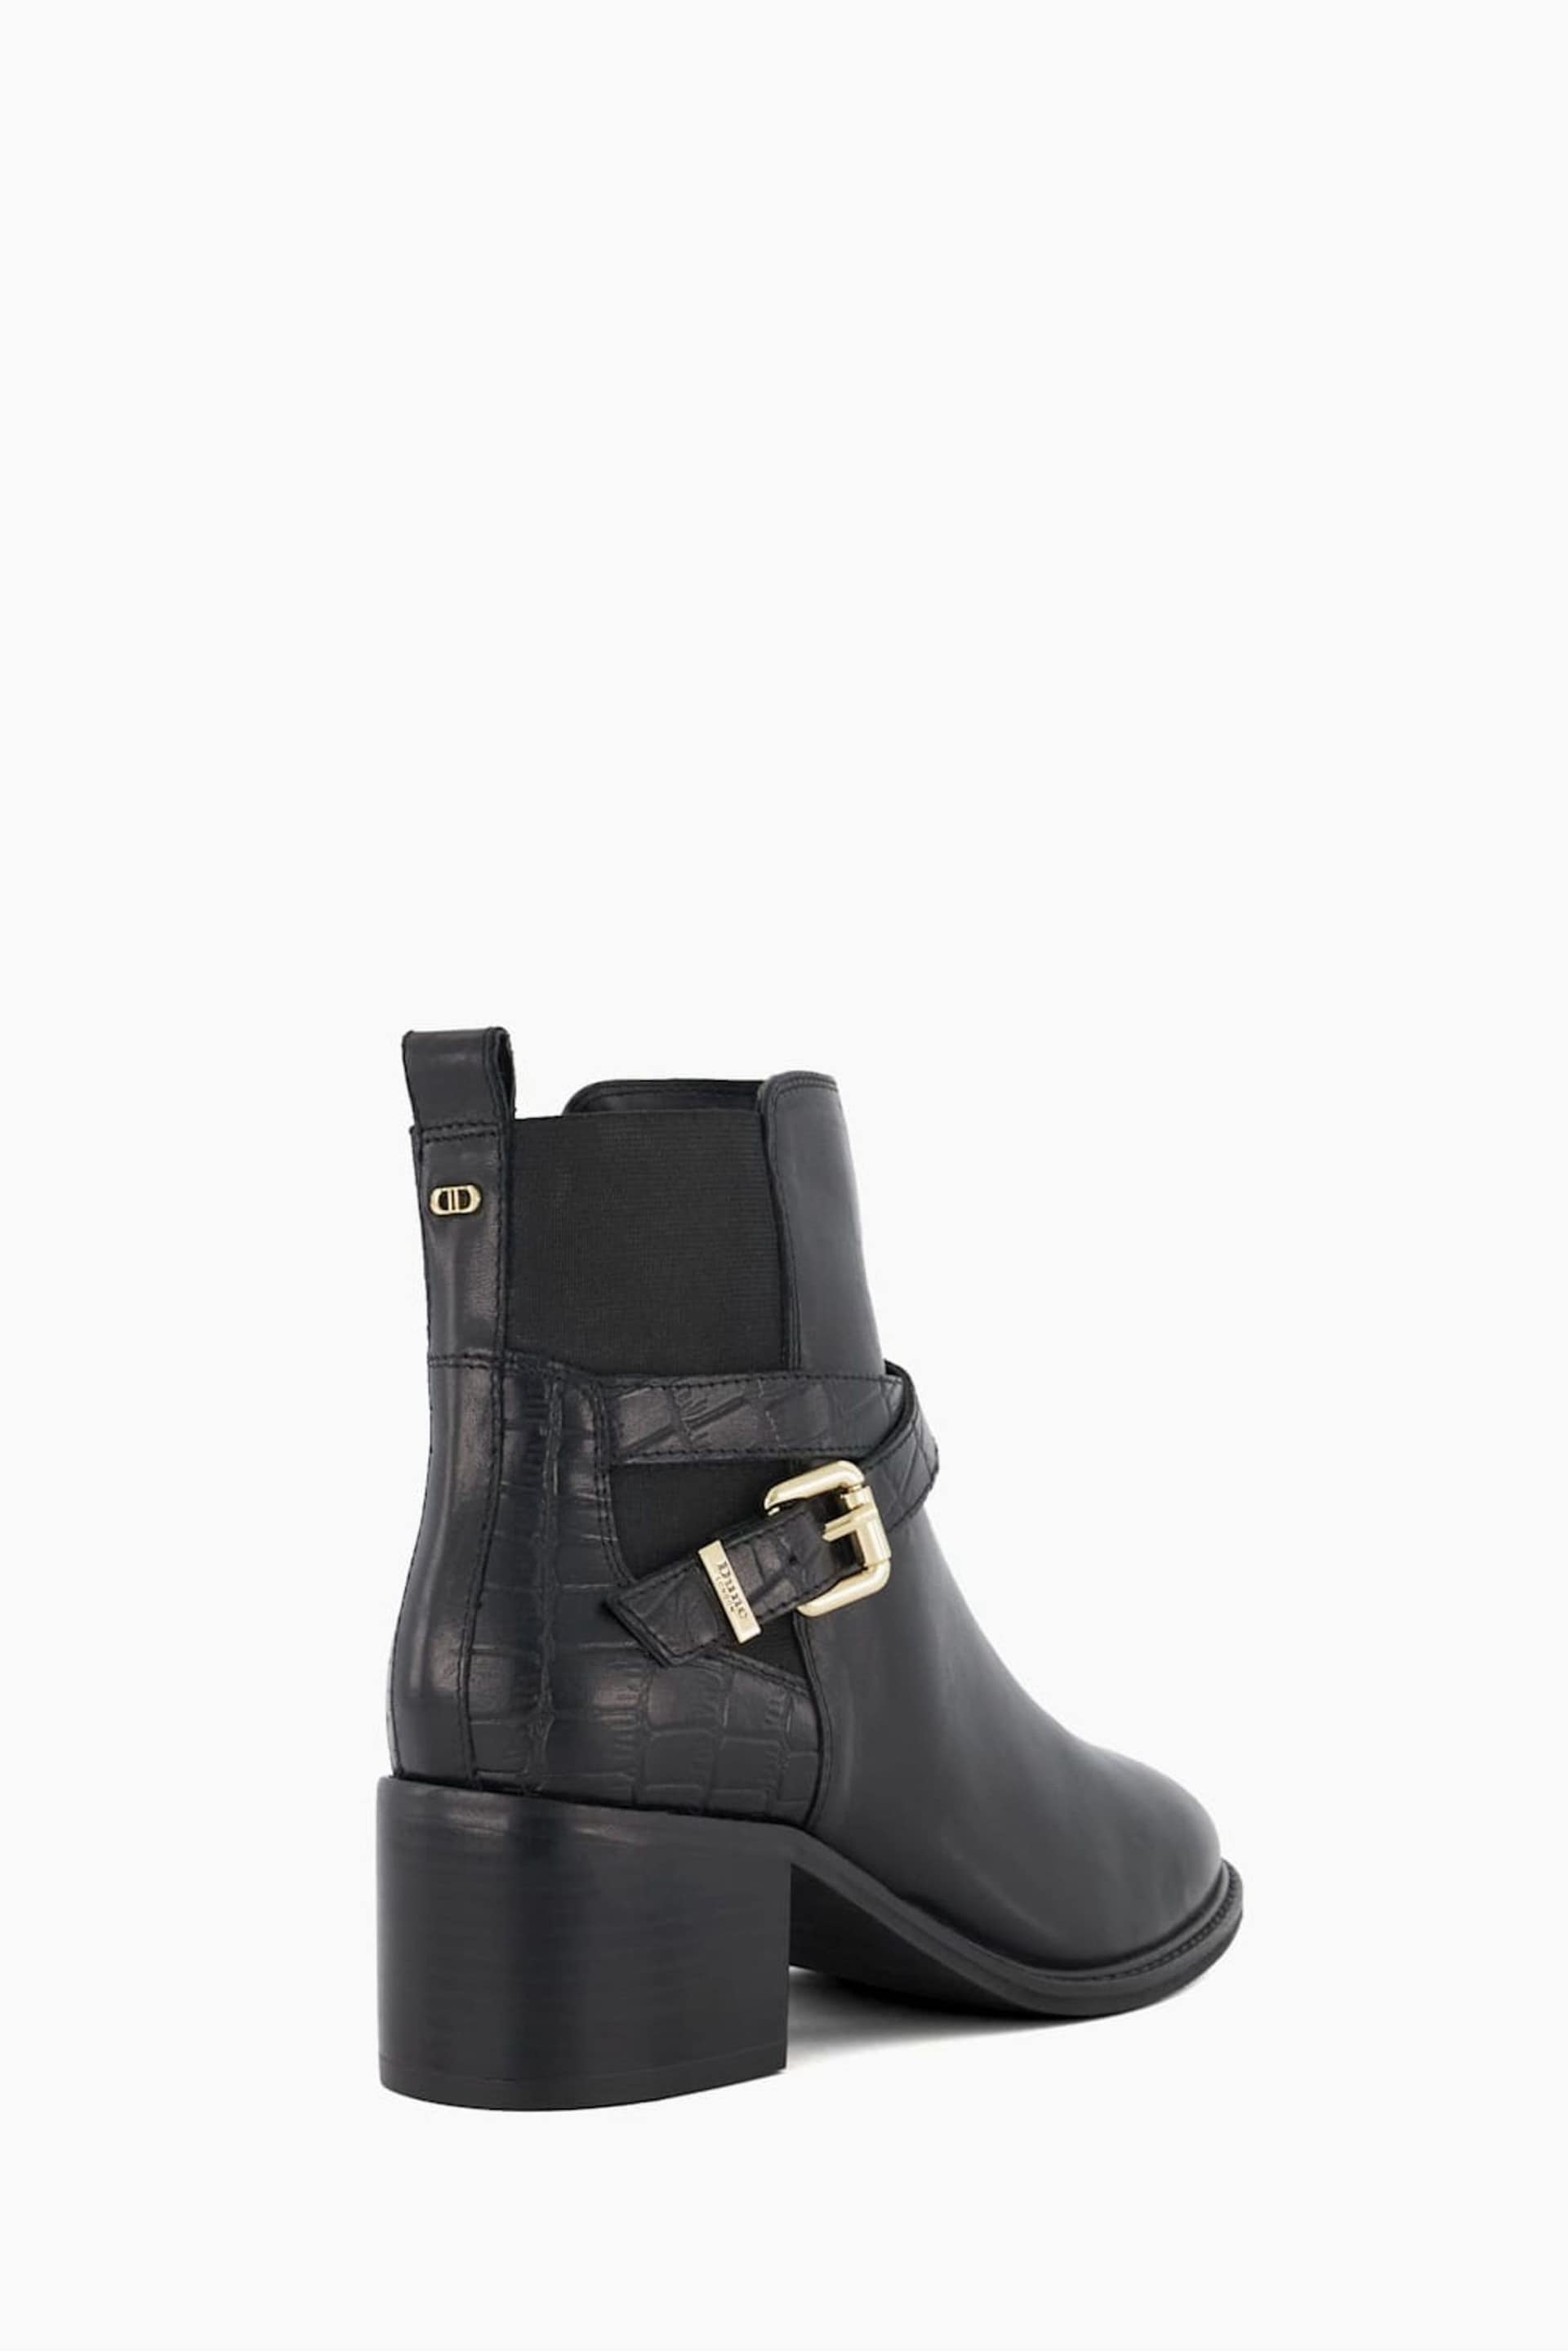 Dune London Black Pout Buckle Detail Heeled Boots - Image 3 of 5